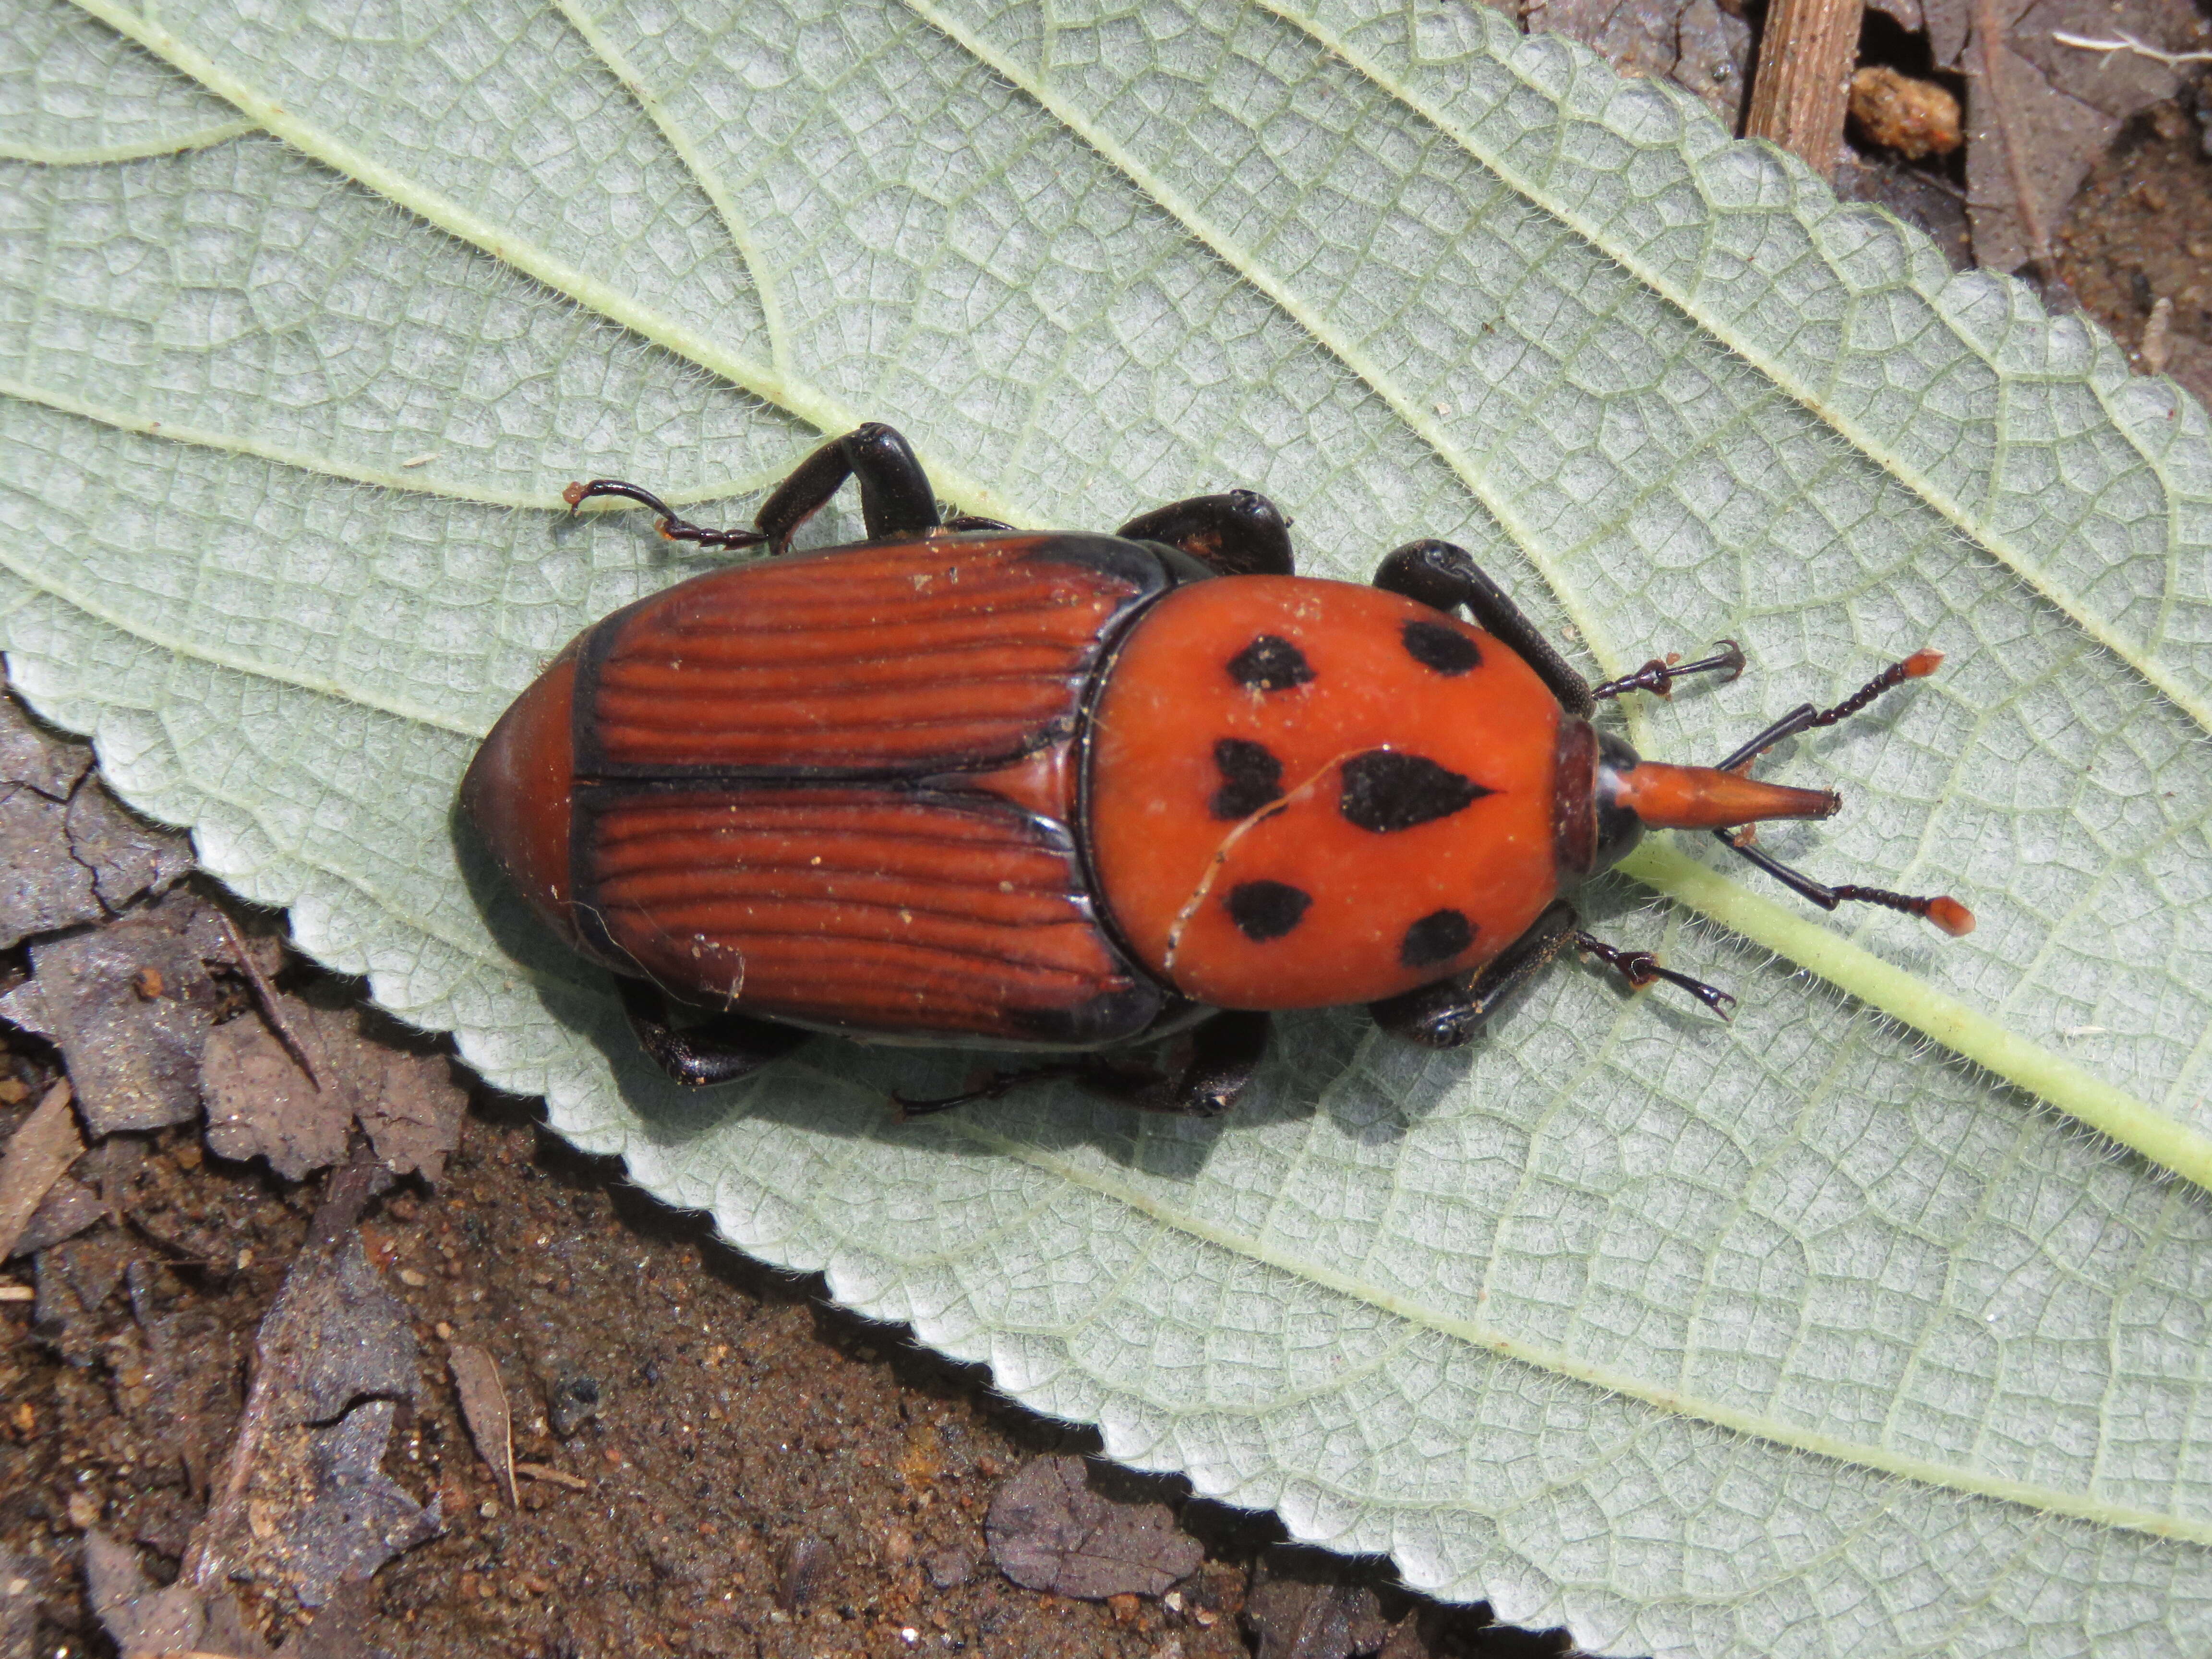 Image of Red palm weevil